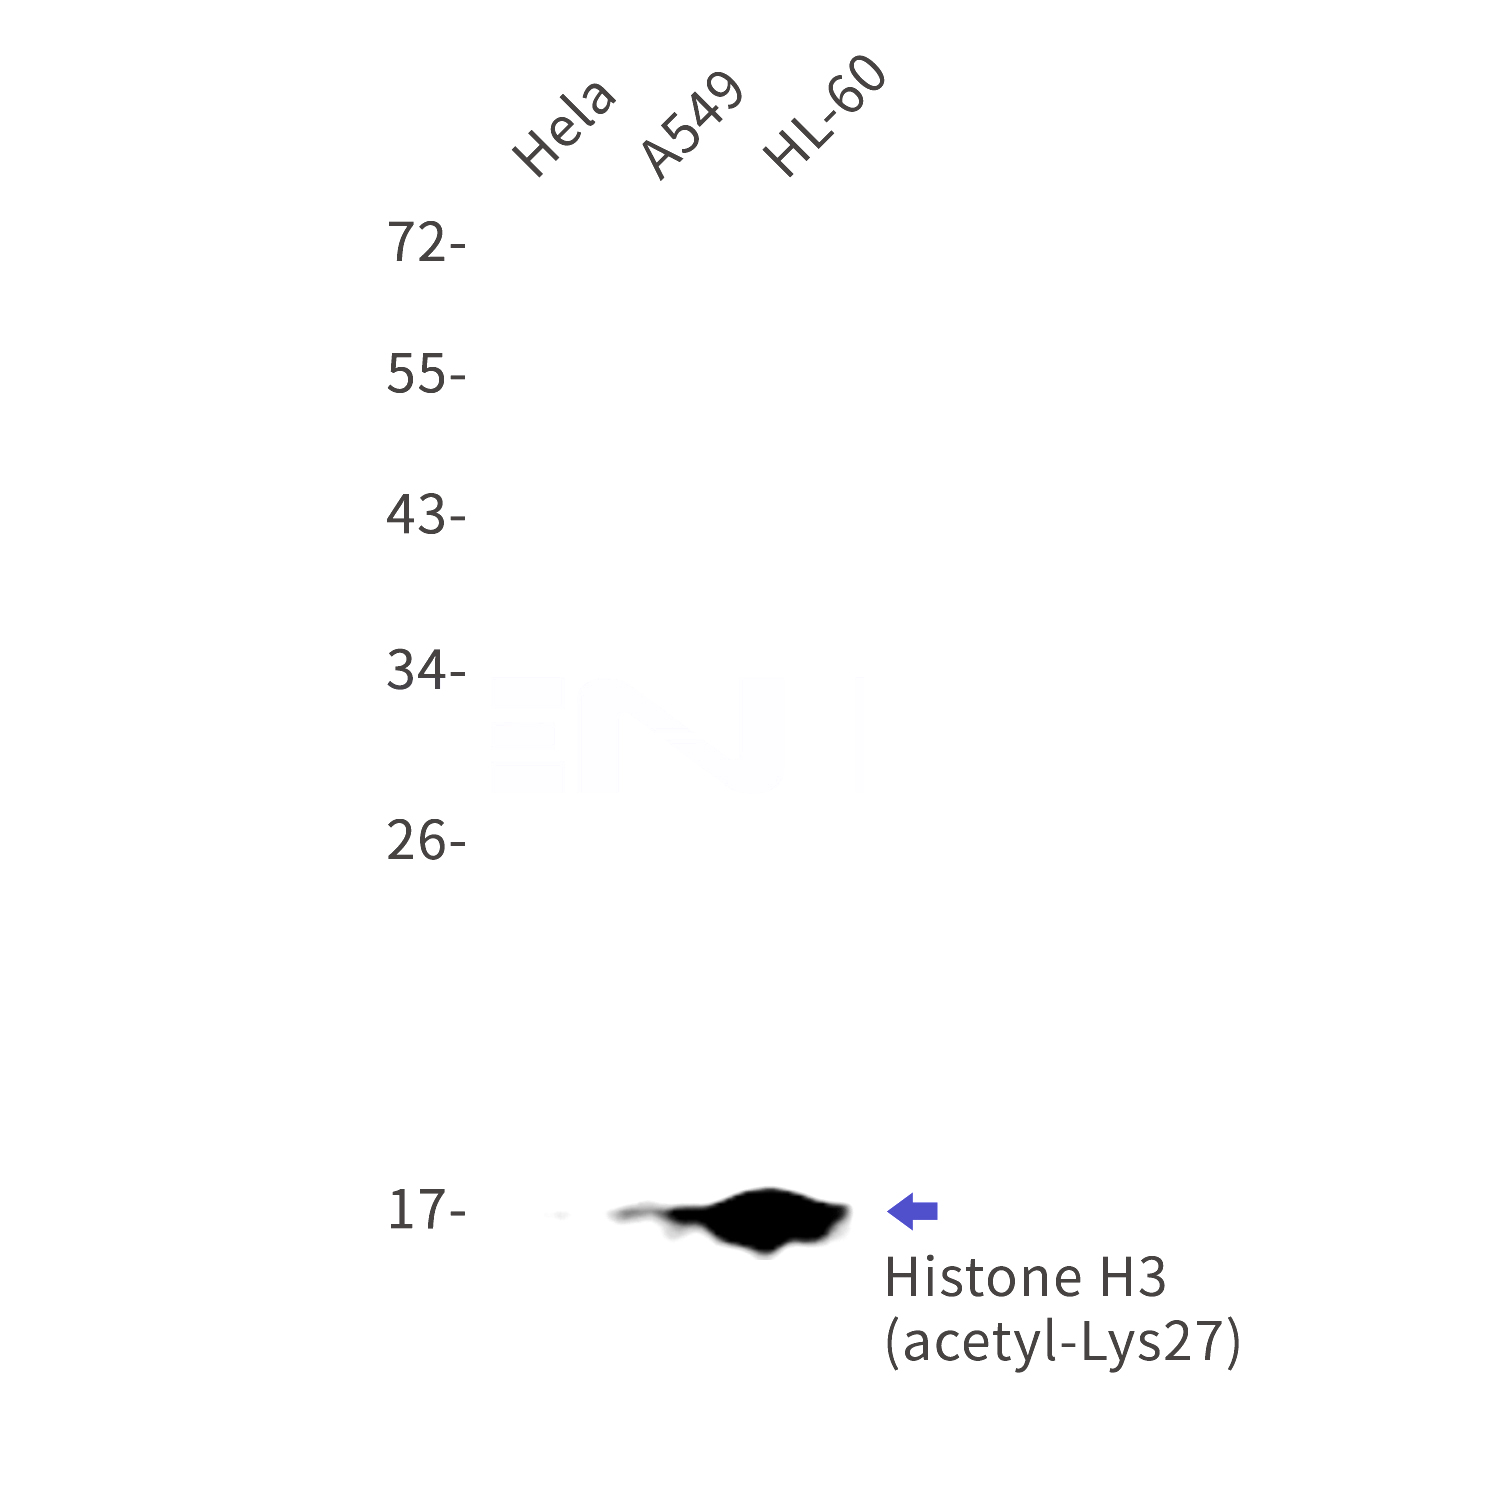 Western blot detection of Histone H3 (acetyl-Lys27) in Hela,A549,HL-60 cell lysates using Histone H3 (acetyl-Lys27) Rabbit mAb(1:1000 diluted).Predicted band size:15kDa.Observed band size:17kDa.